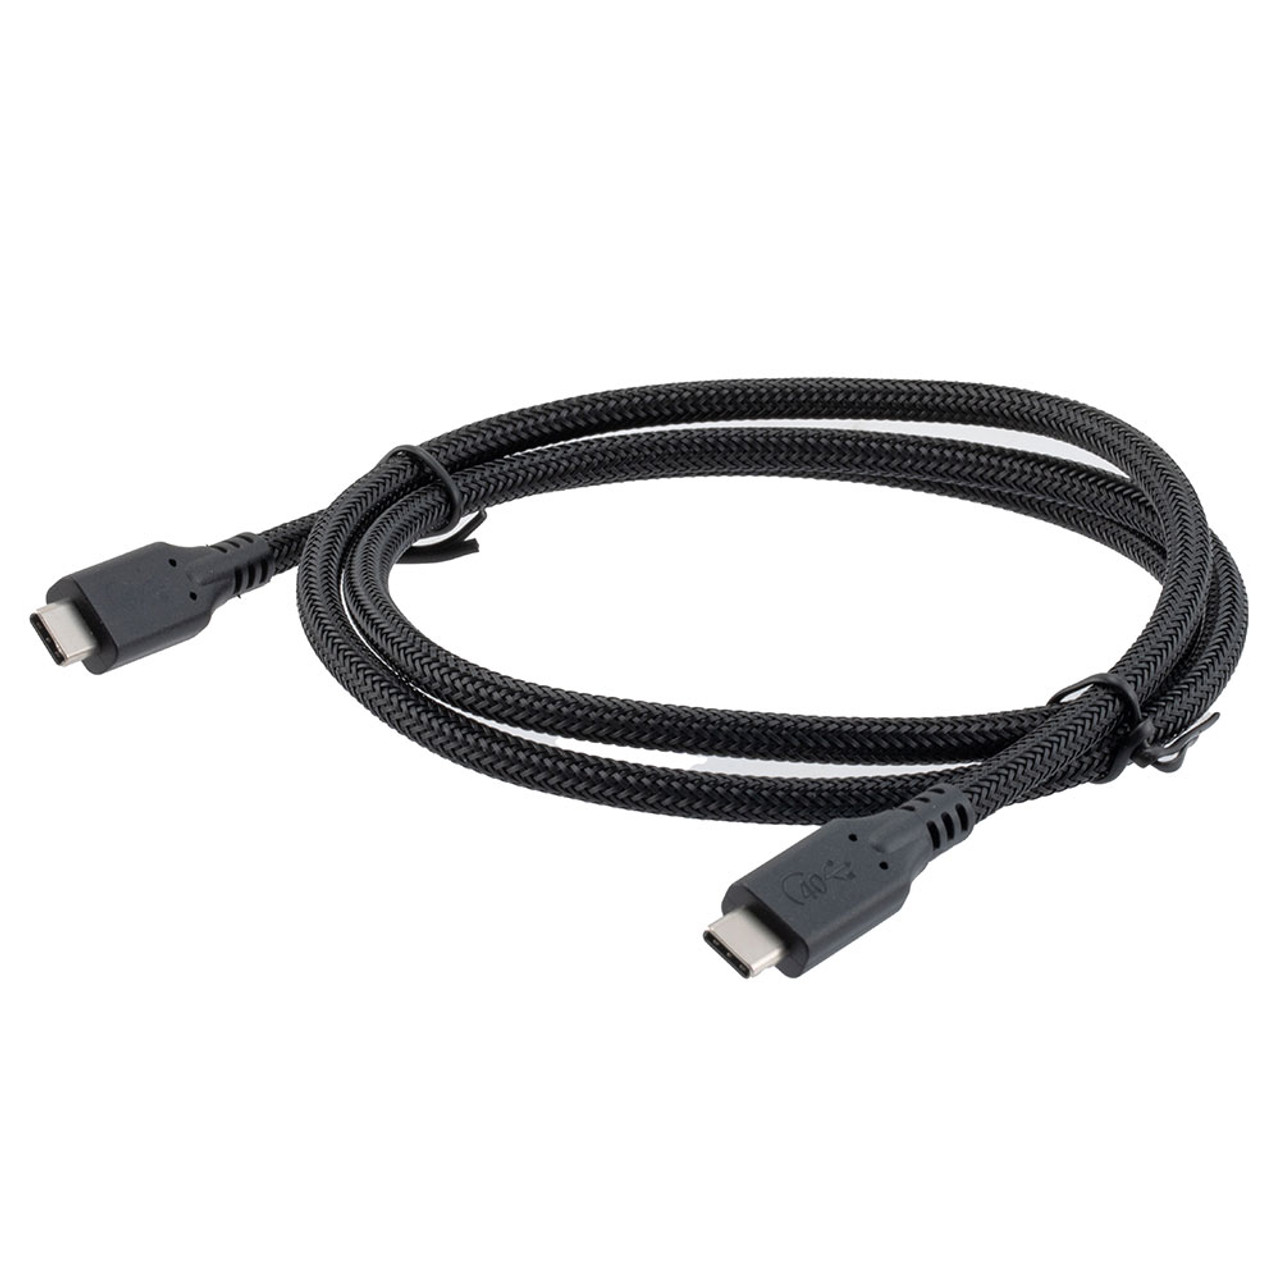 NavePoint USB C 4.0 Male to USB C 4.0 Male Cable, Molded PVC, Supports 20 Volts/240 Watts, 40 Gbps, Black Nylon Braid, 1M Length